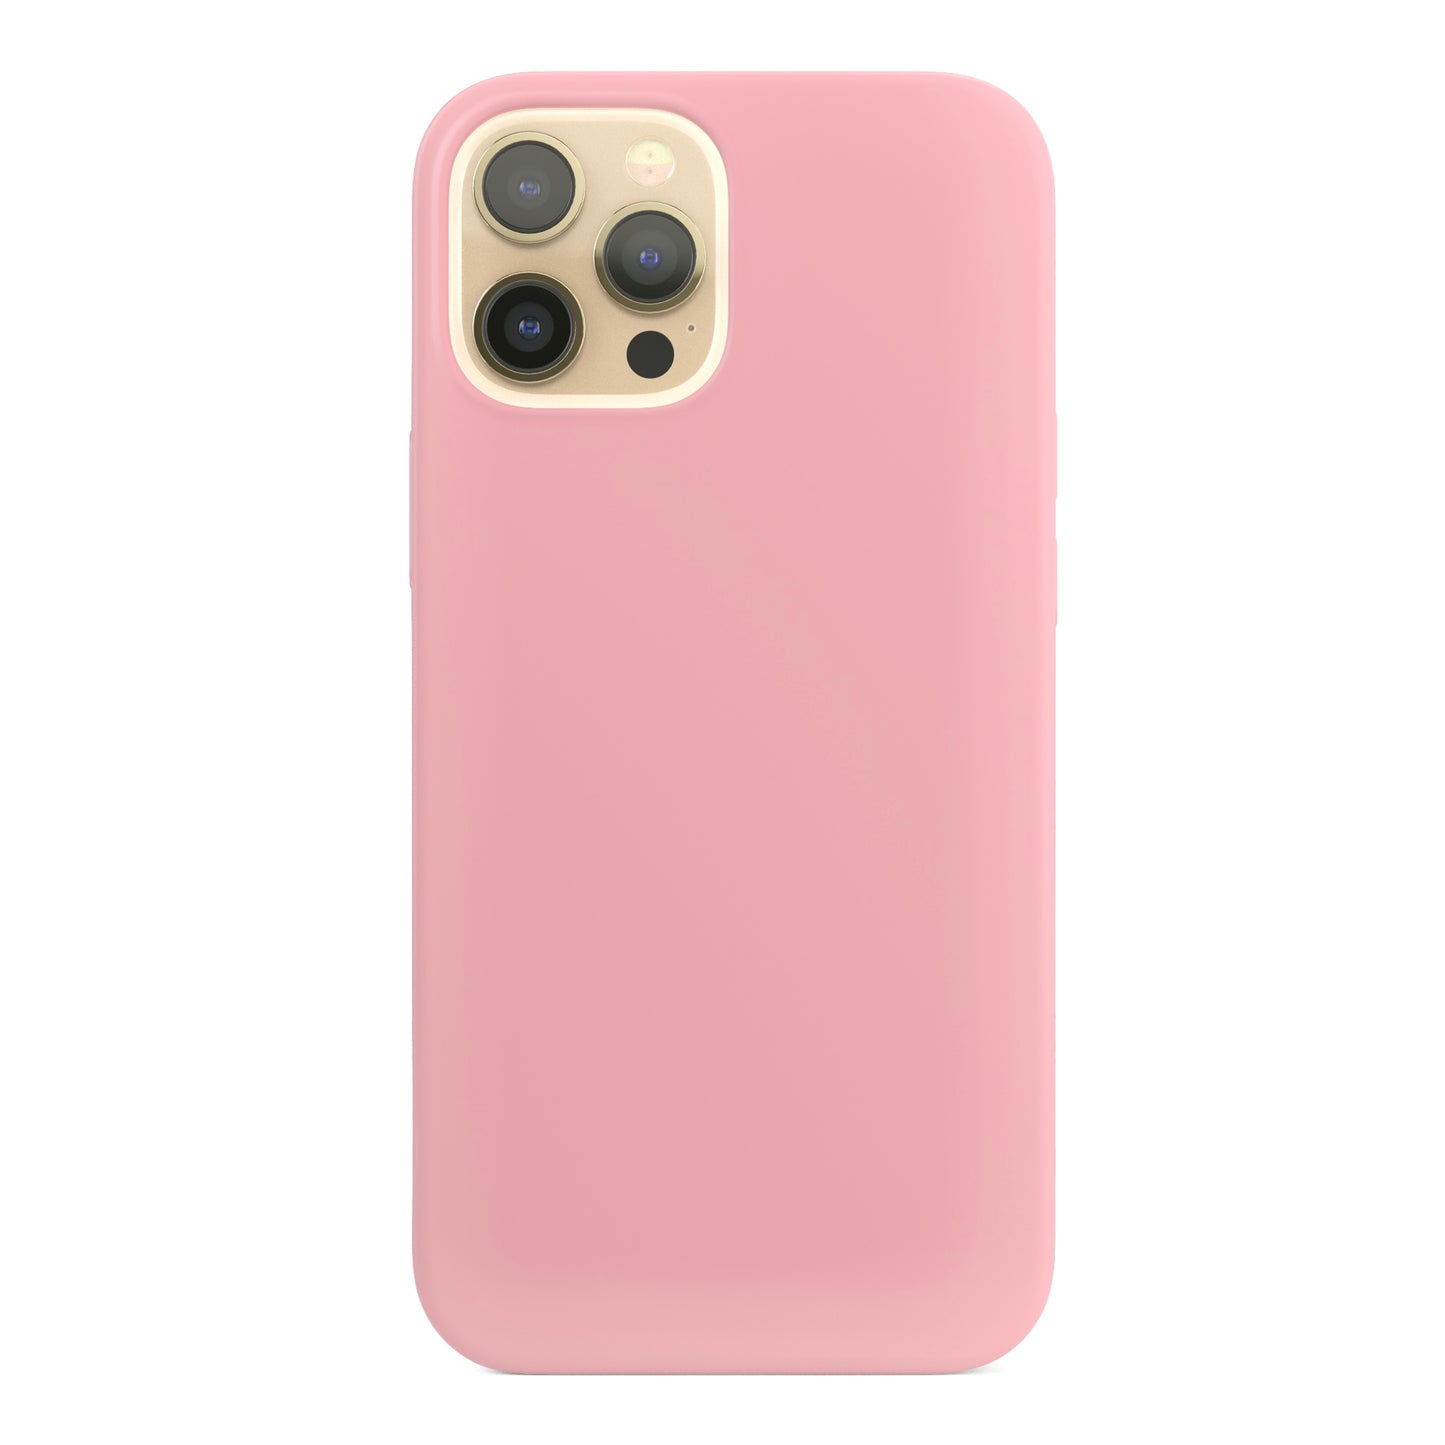 Playful Pink iPhone Case